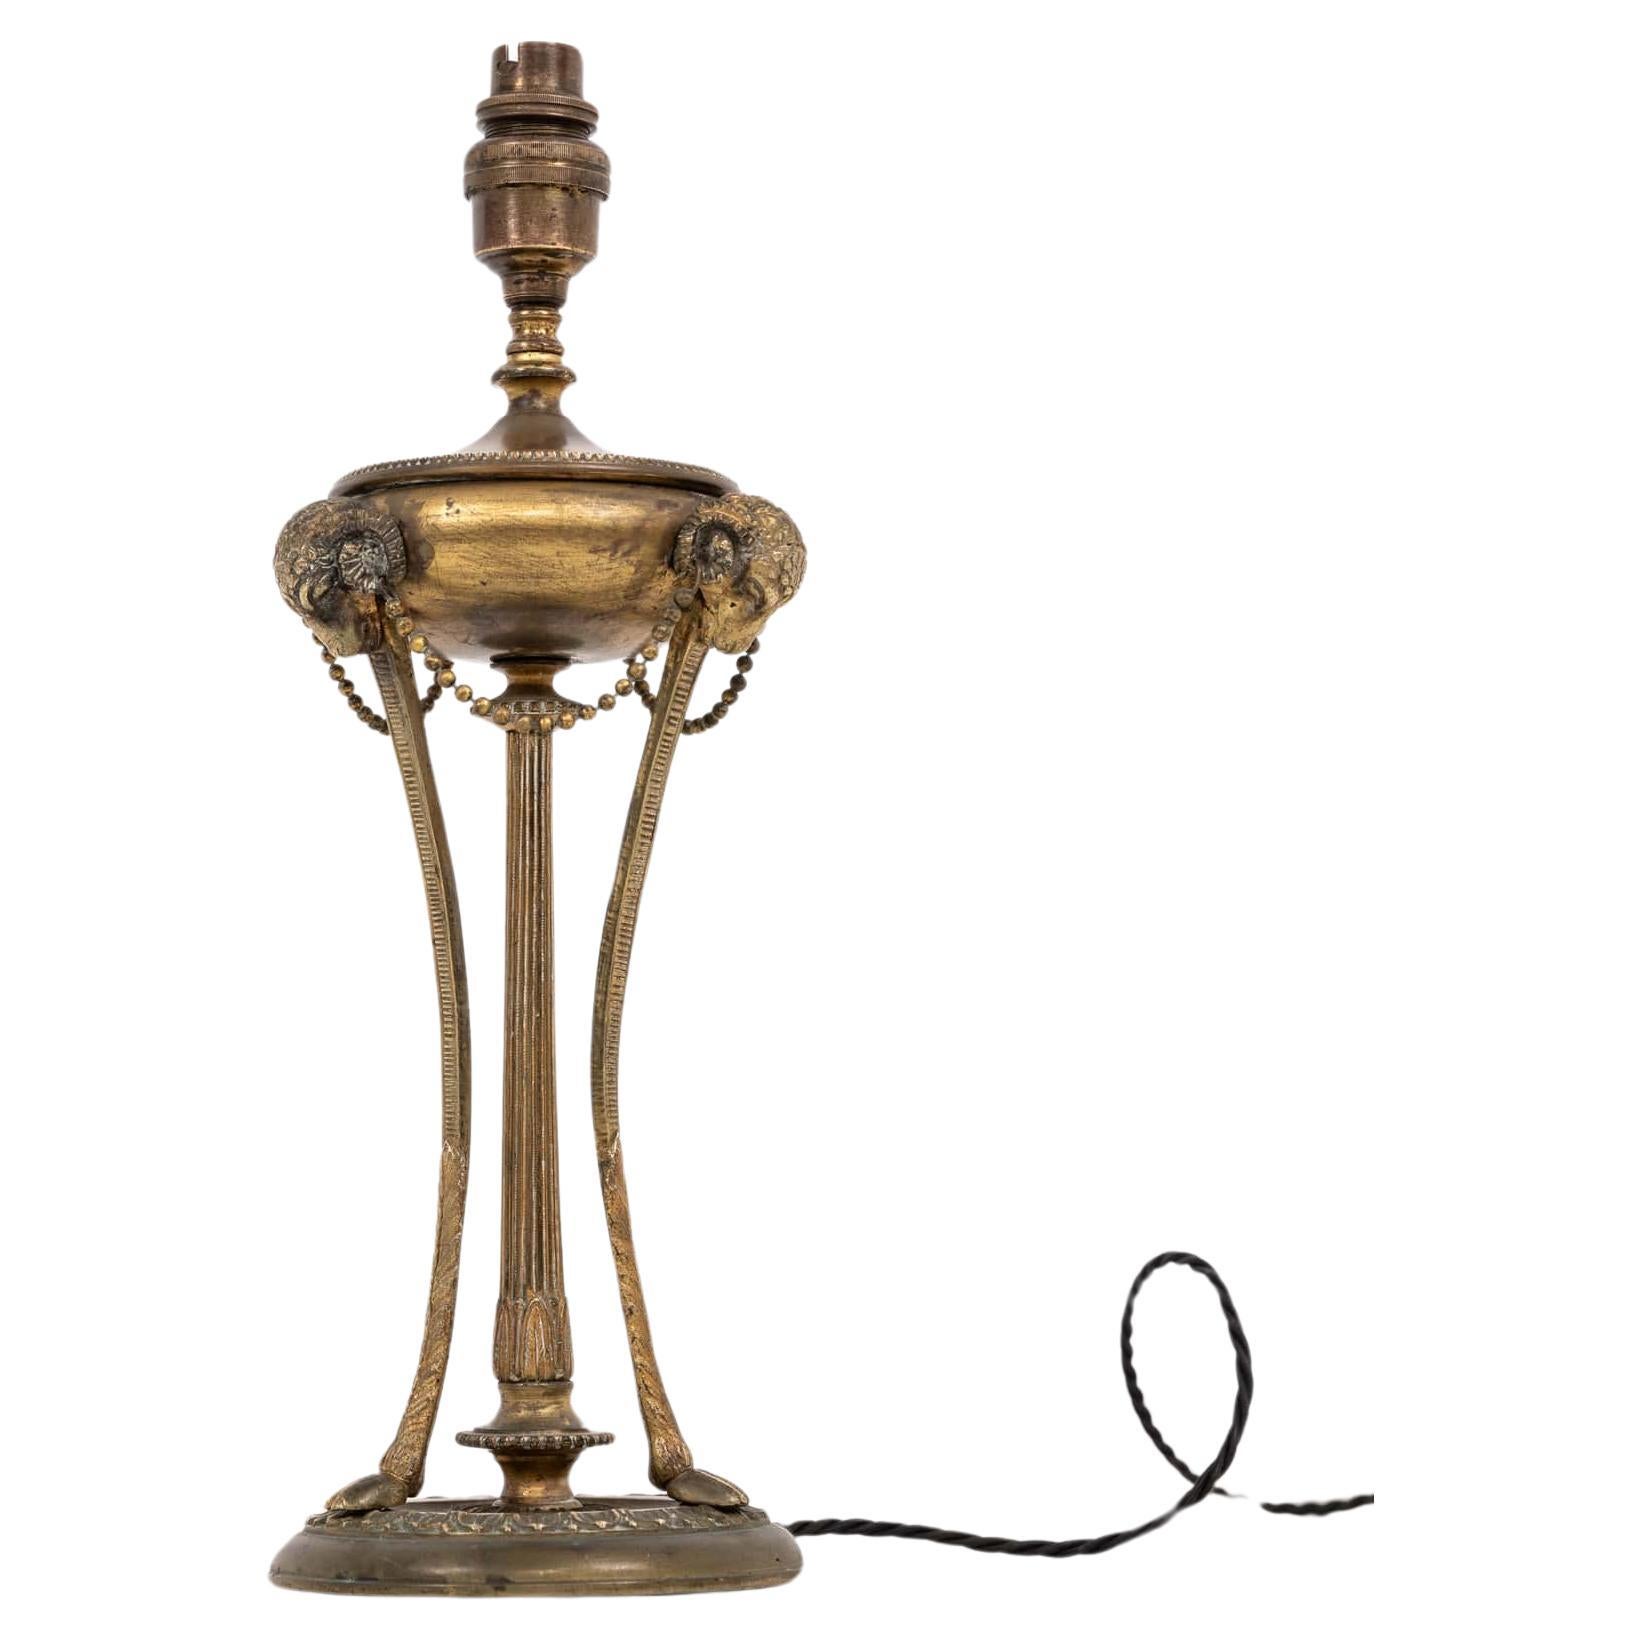 Early 20th Century Antique Vintage Brass Rams Head Desk Table Lamp, c.1910